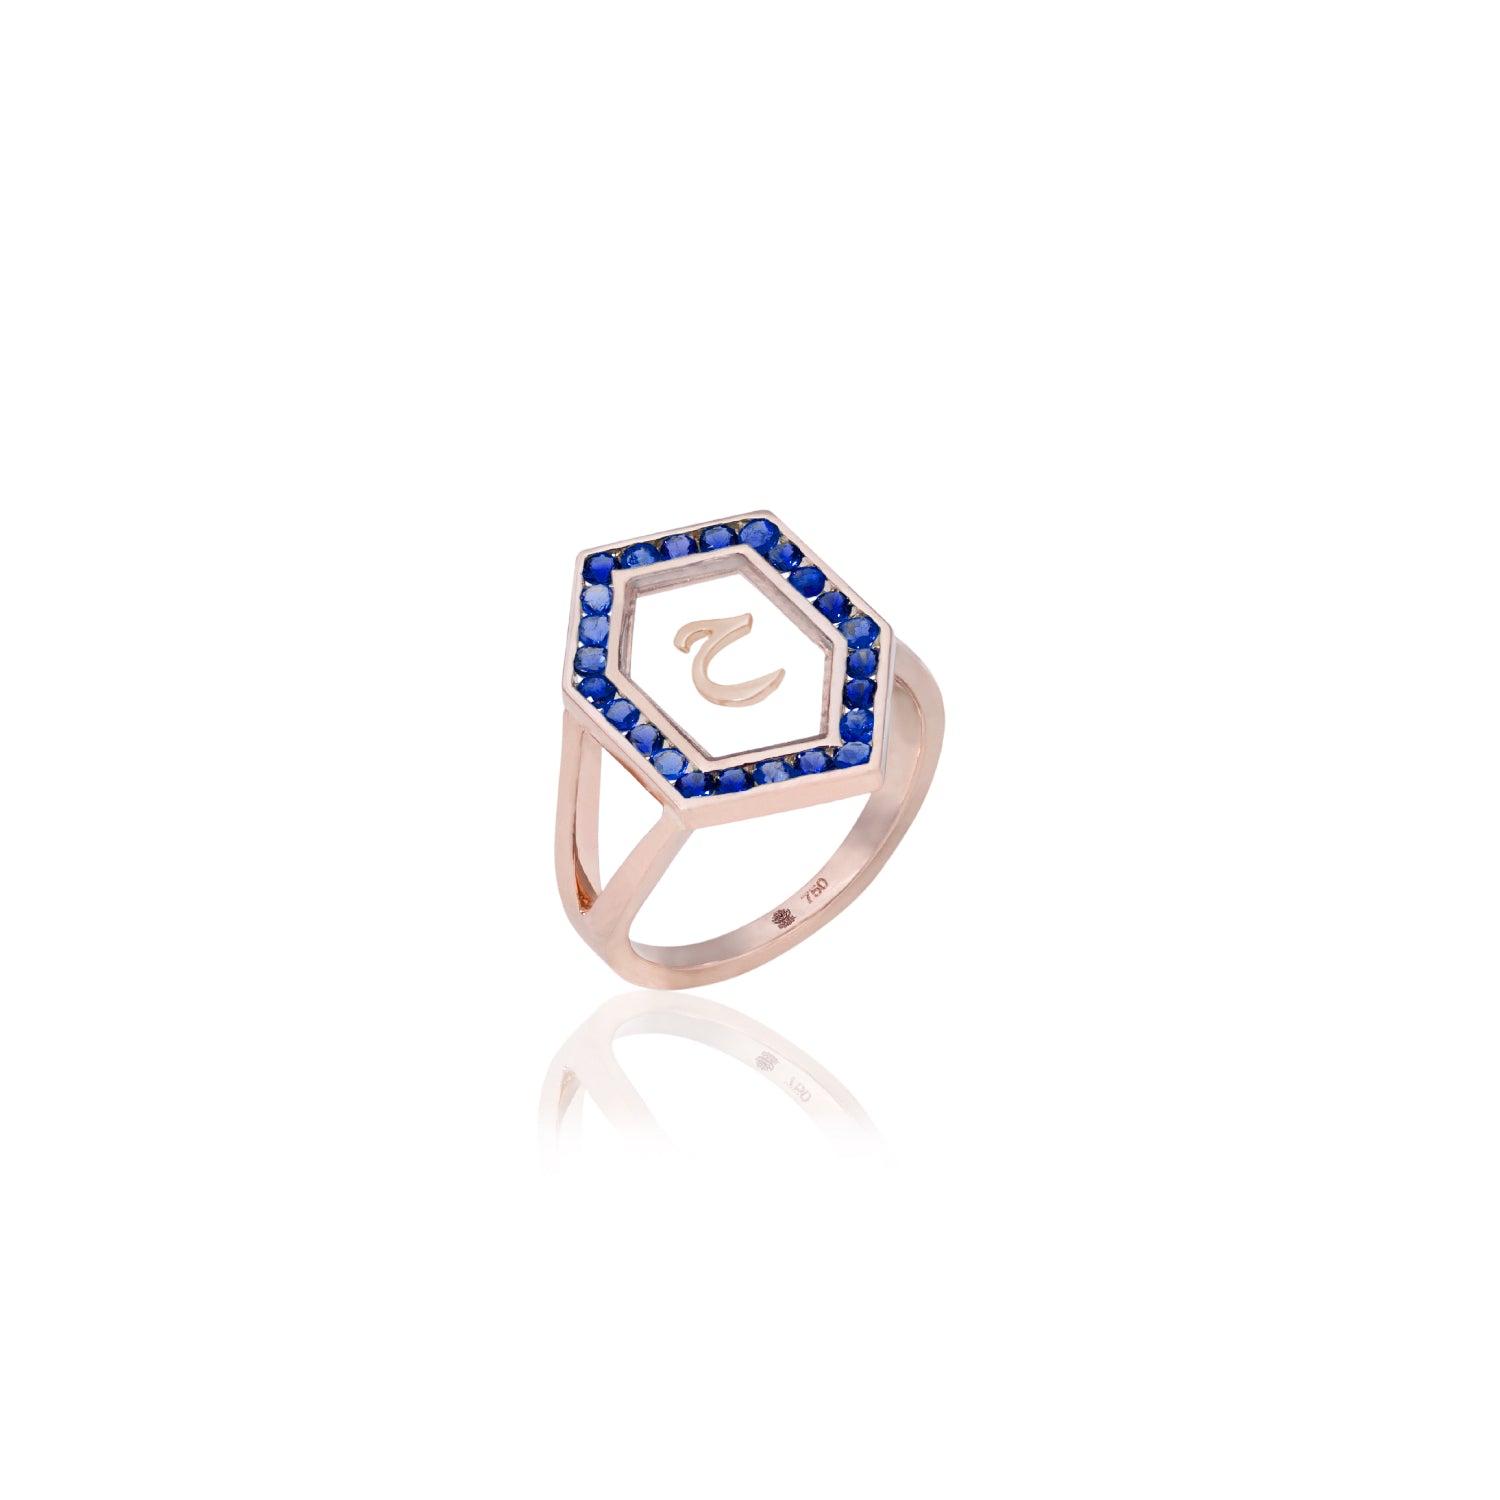 Qamoos 1.0 Letter ح Sapphire Ring in Rose Gold